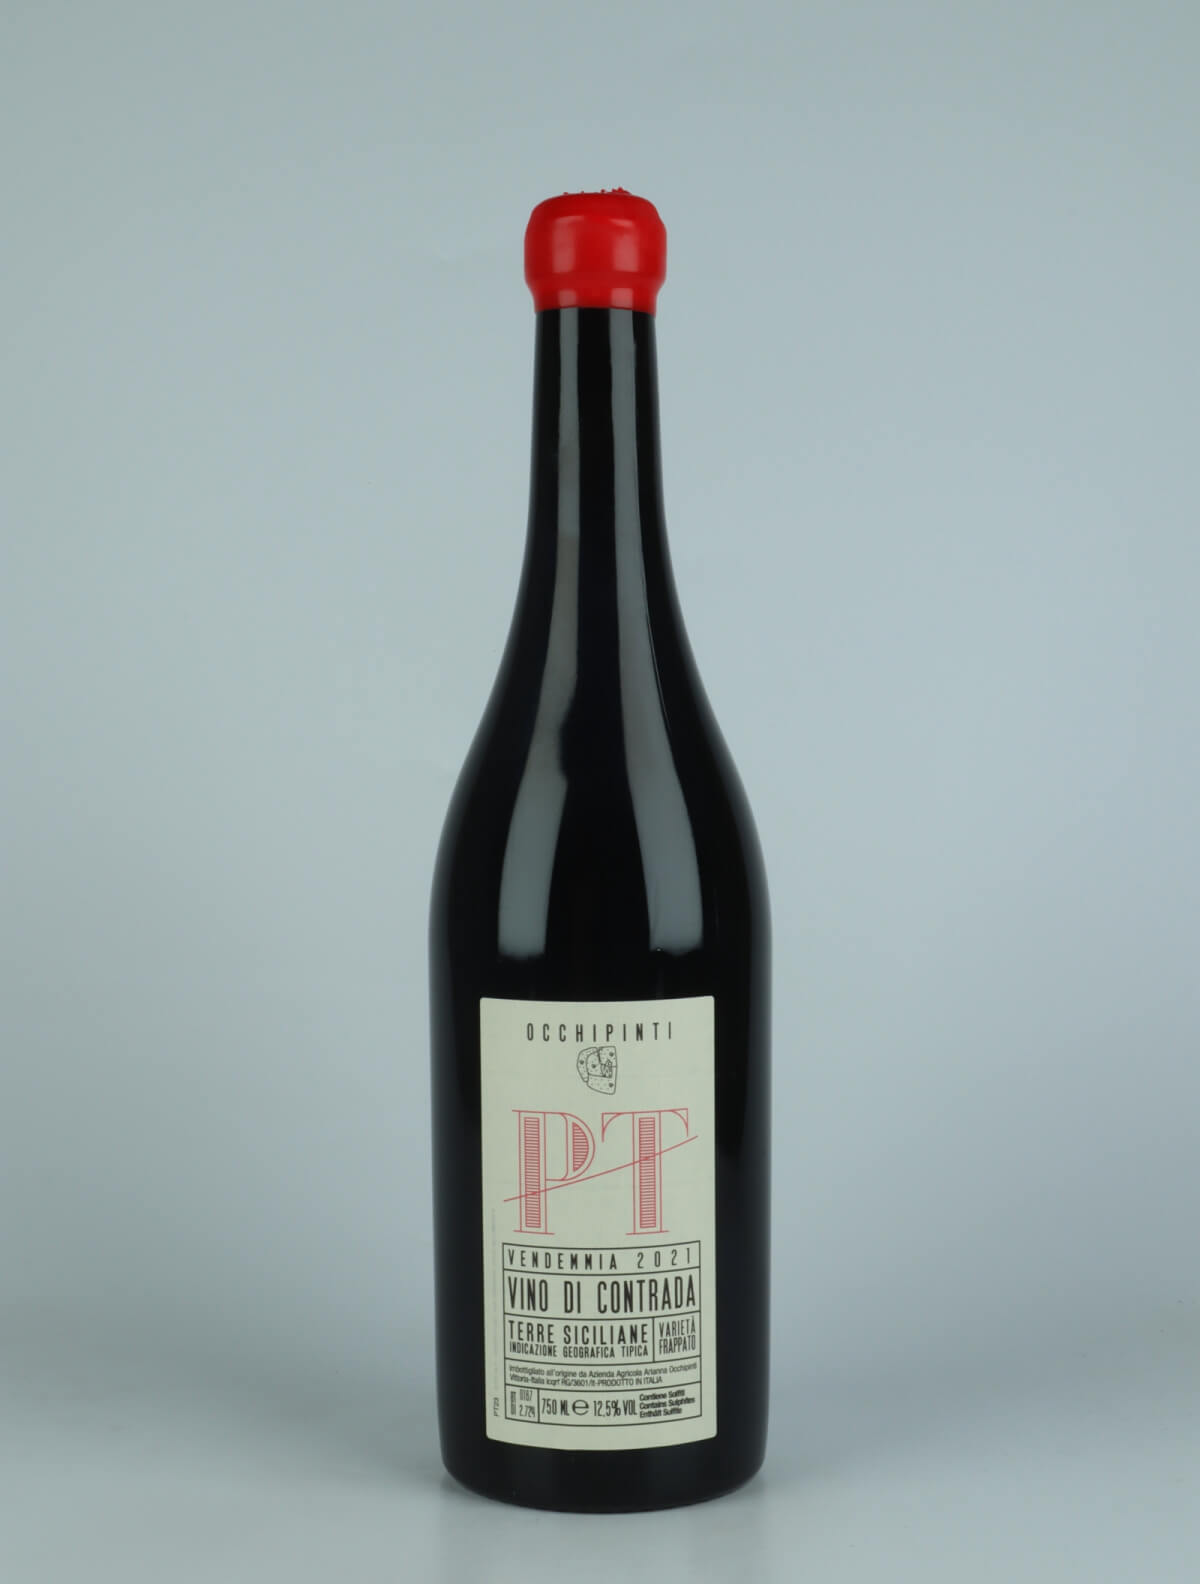 A bottle 2021 Pettineo Red wine from Arianna Occhipinti, Sicily in Italy